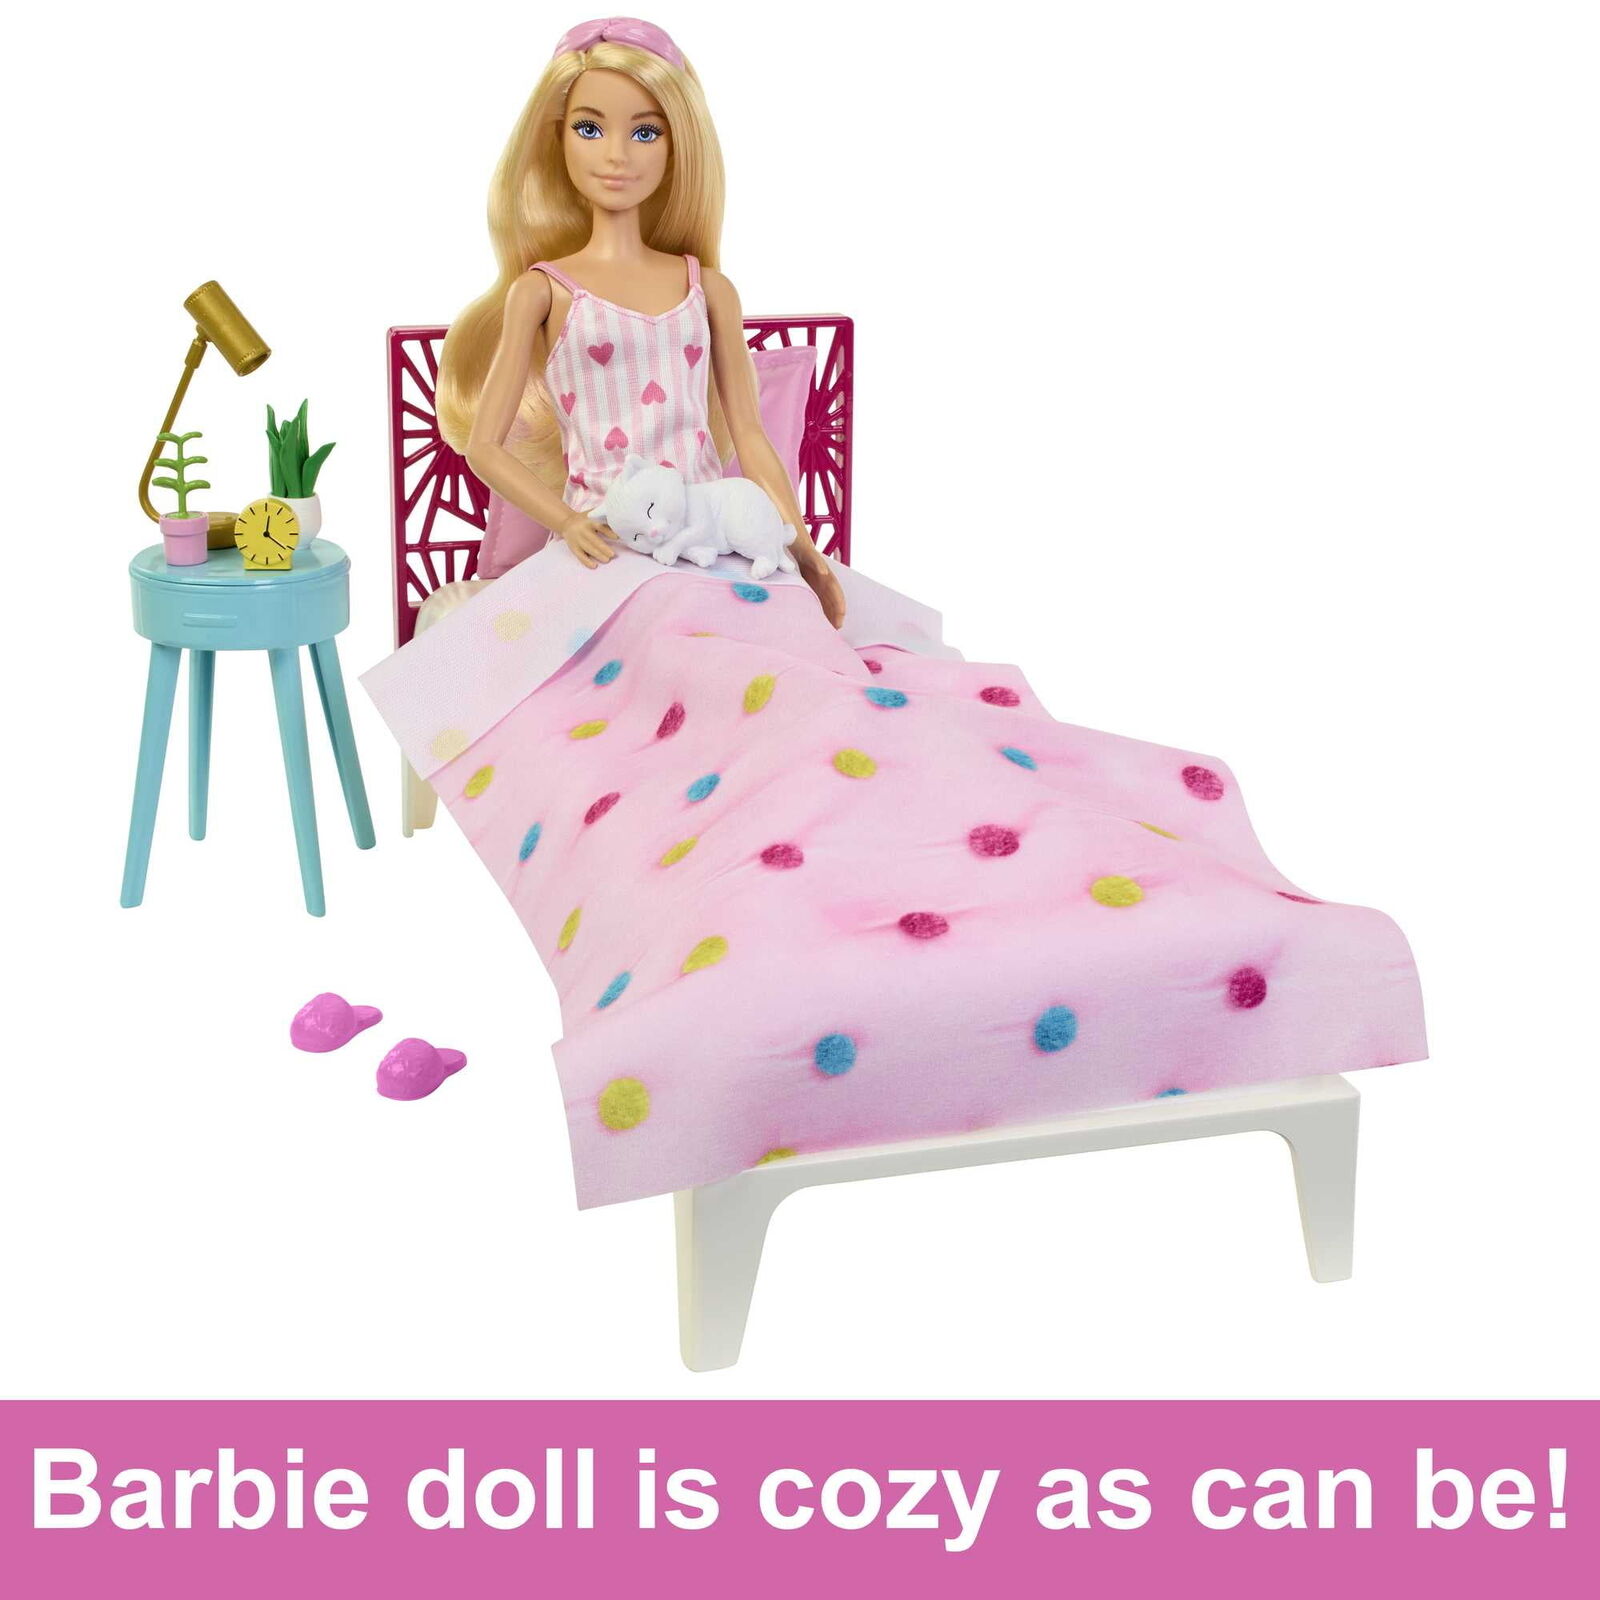 Doll and Bedroom Playset, Barbie Furniture with 20+ Storytelling Pieces